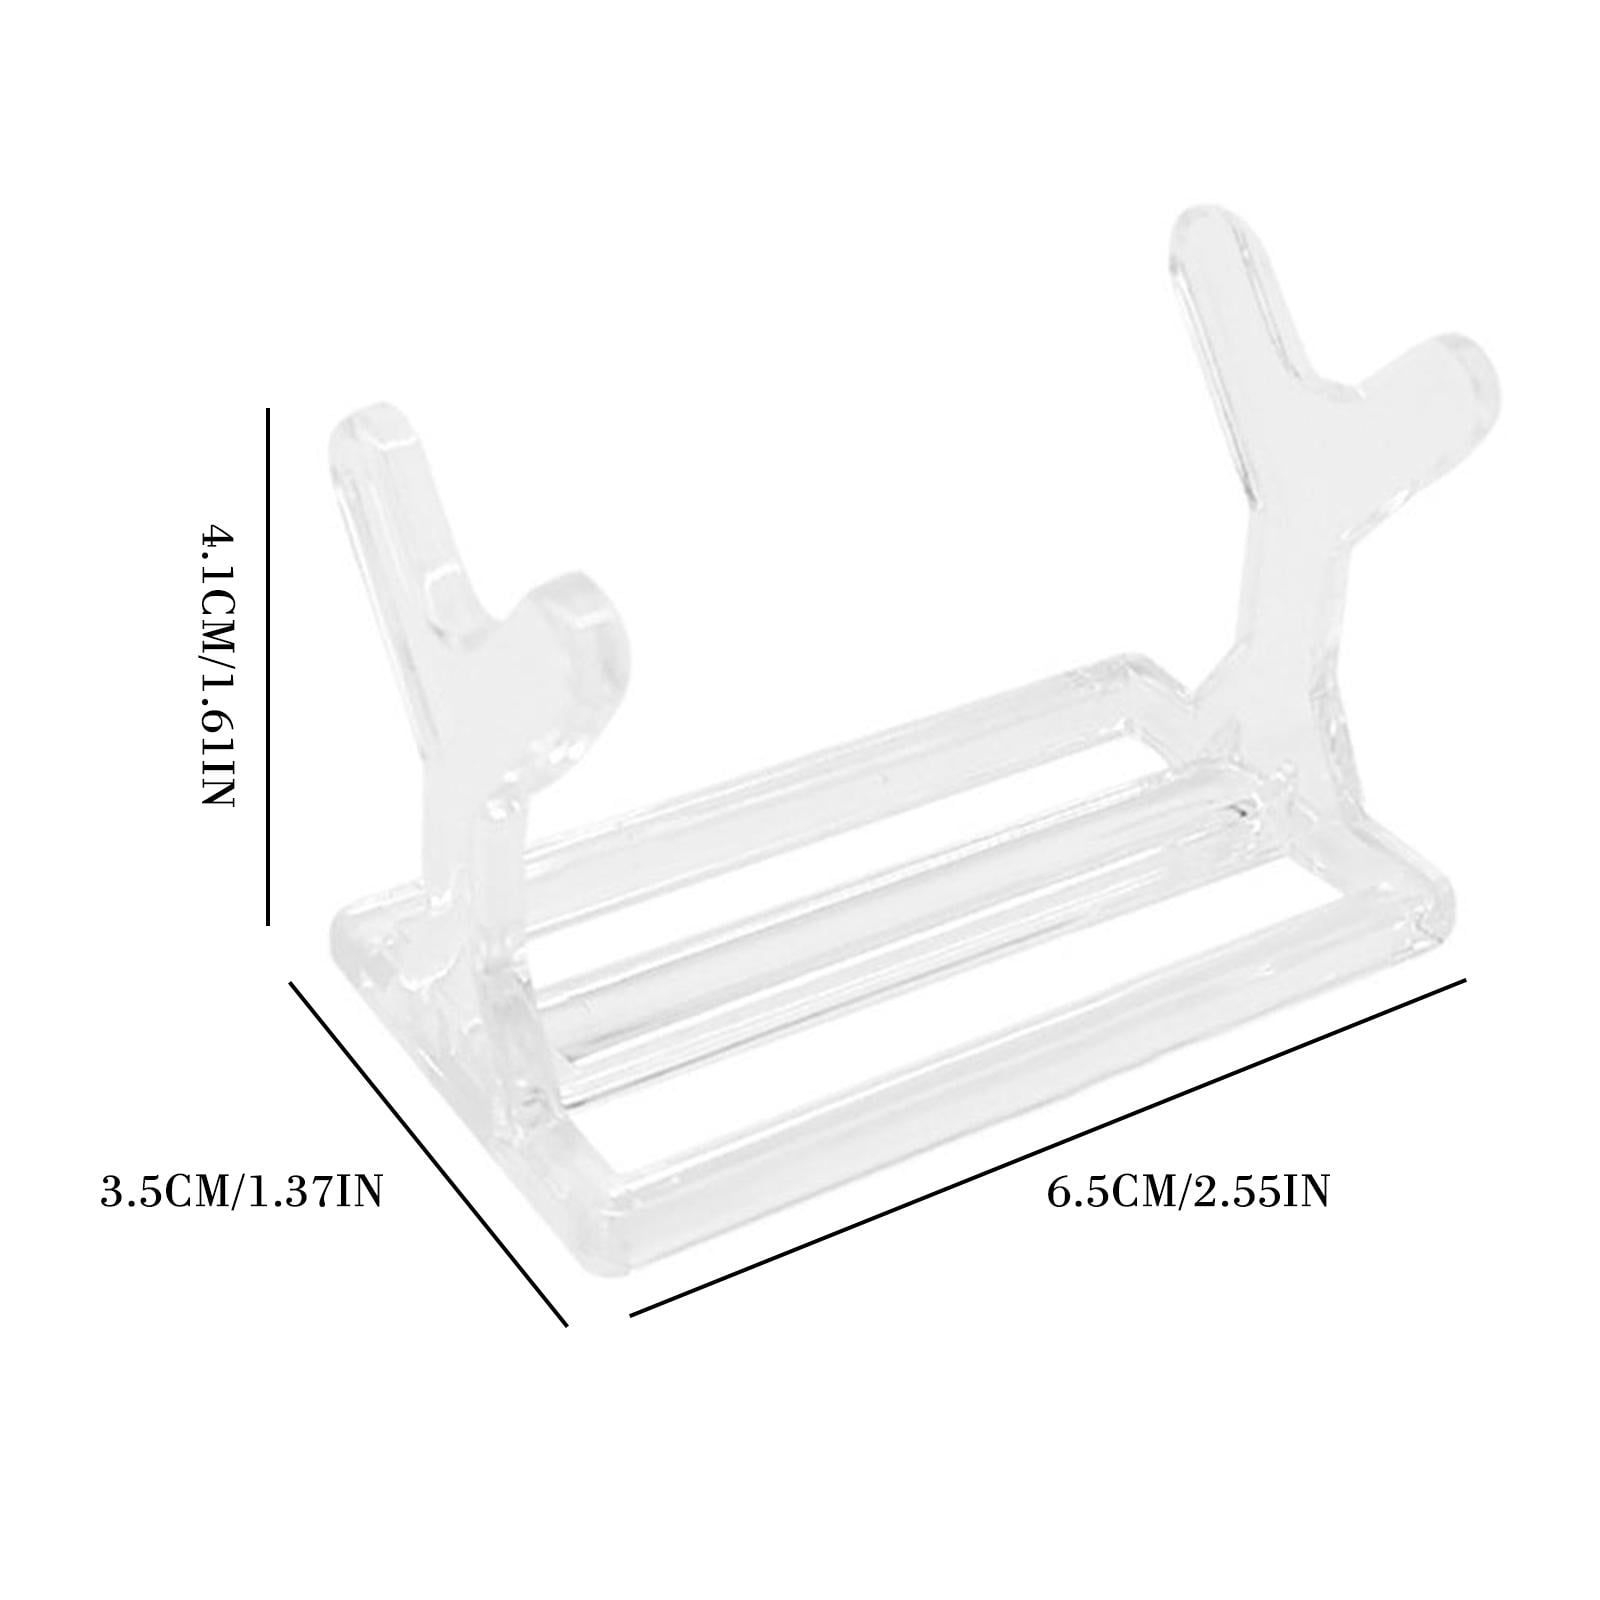 QINXI 3pcs Acrylic Fishing Lure Display Stands Decorative Bait Showing Stand  Shelf Holder Support Rack Storage Decoration for Fishing Store K0Q5 